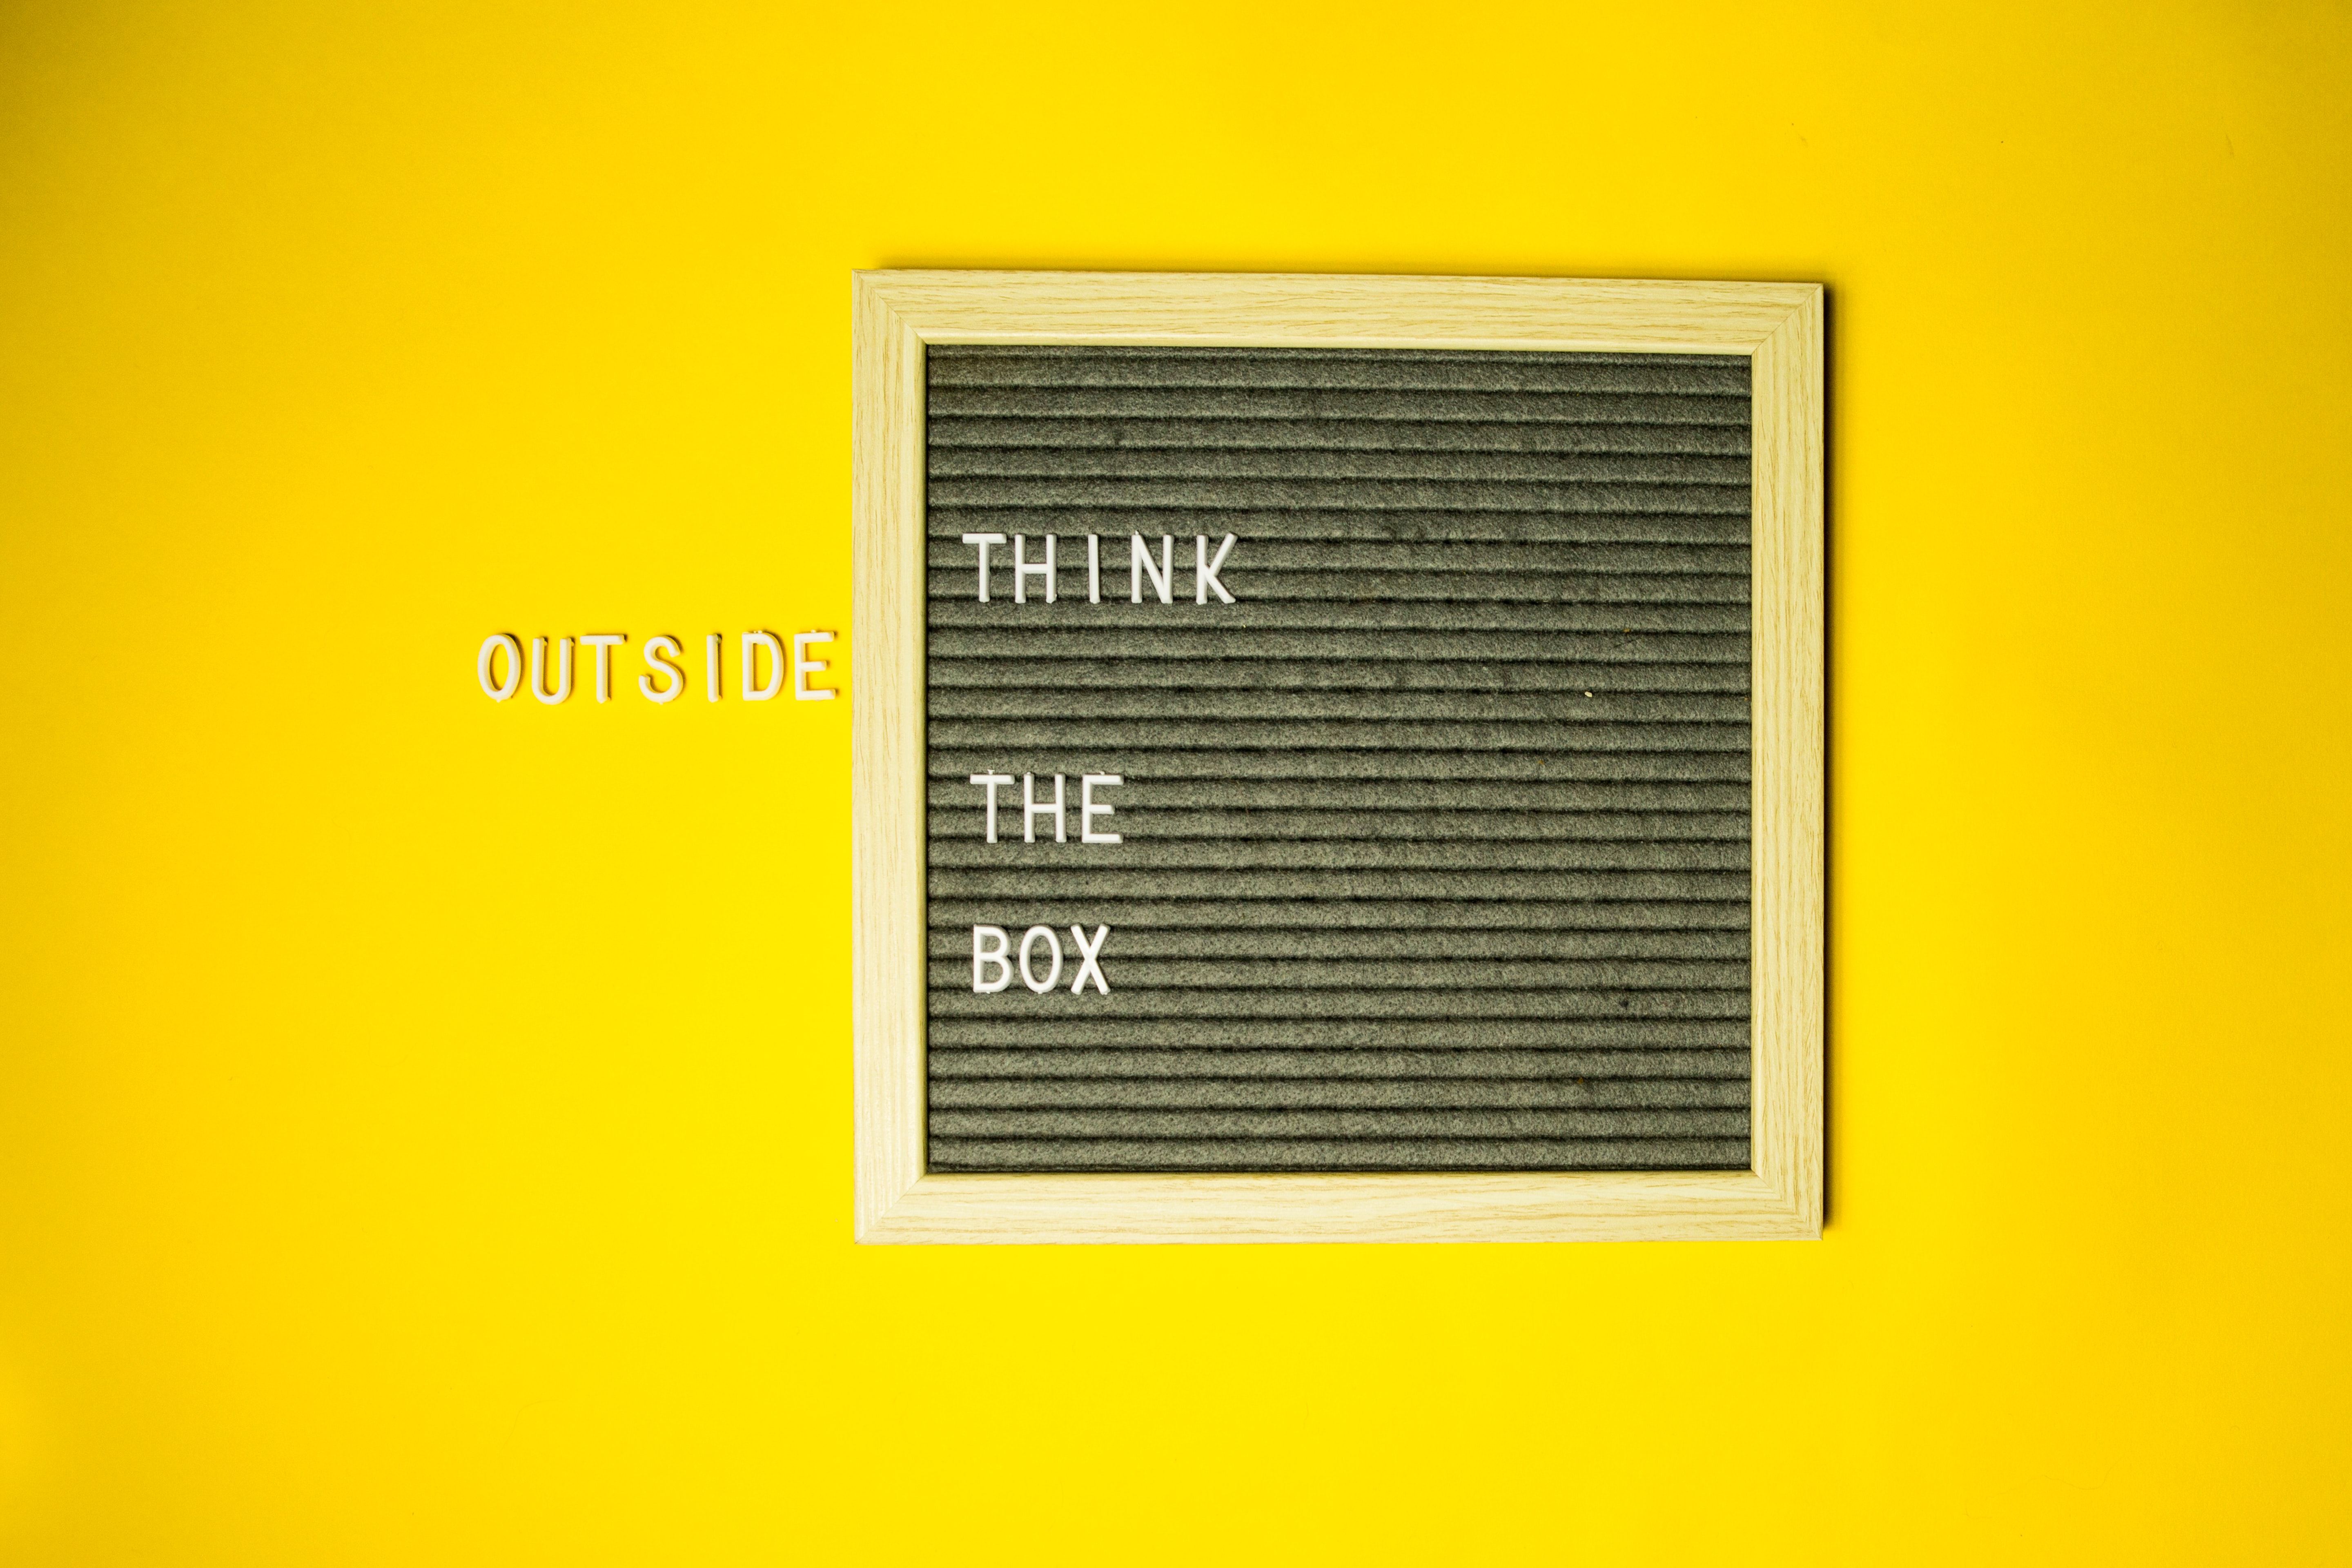 Think outside of the box